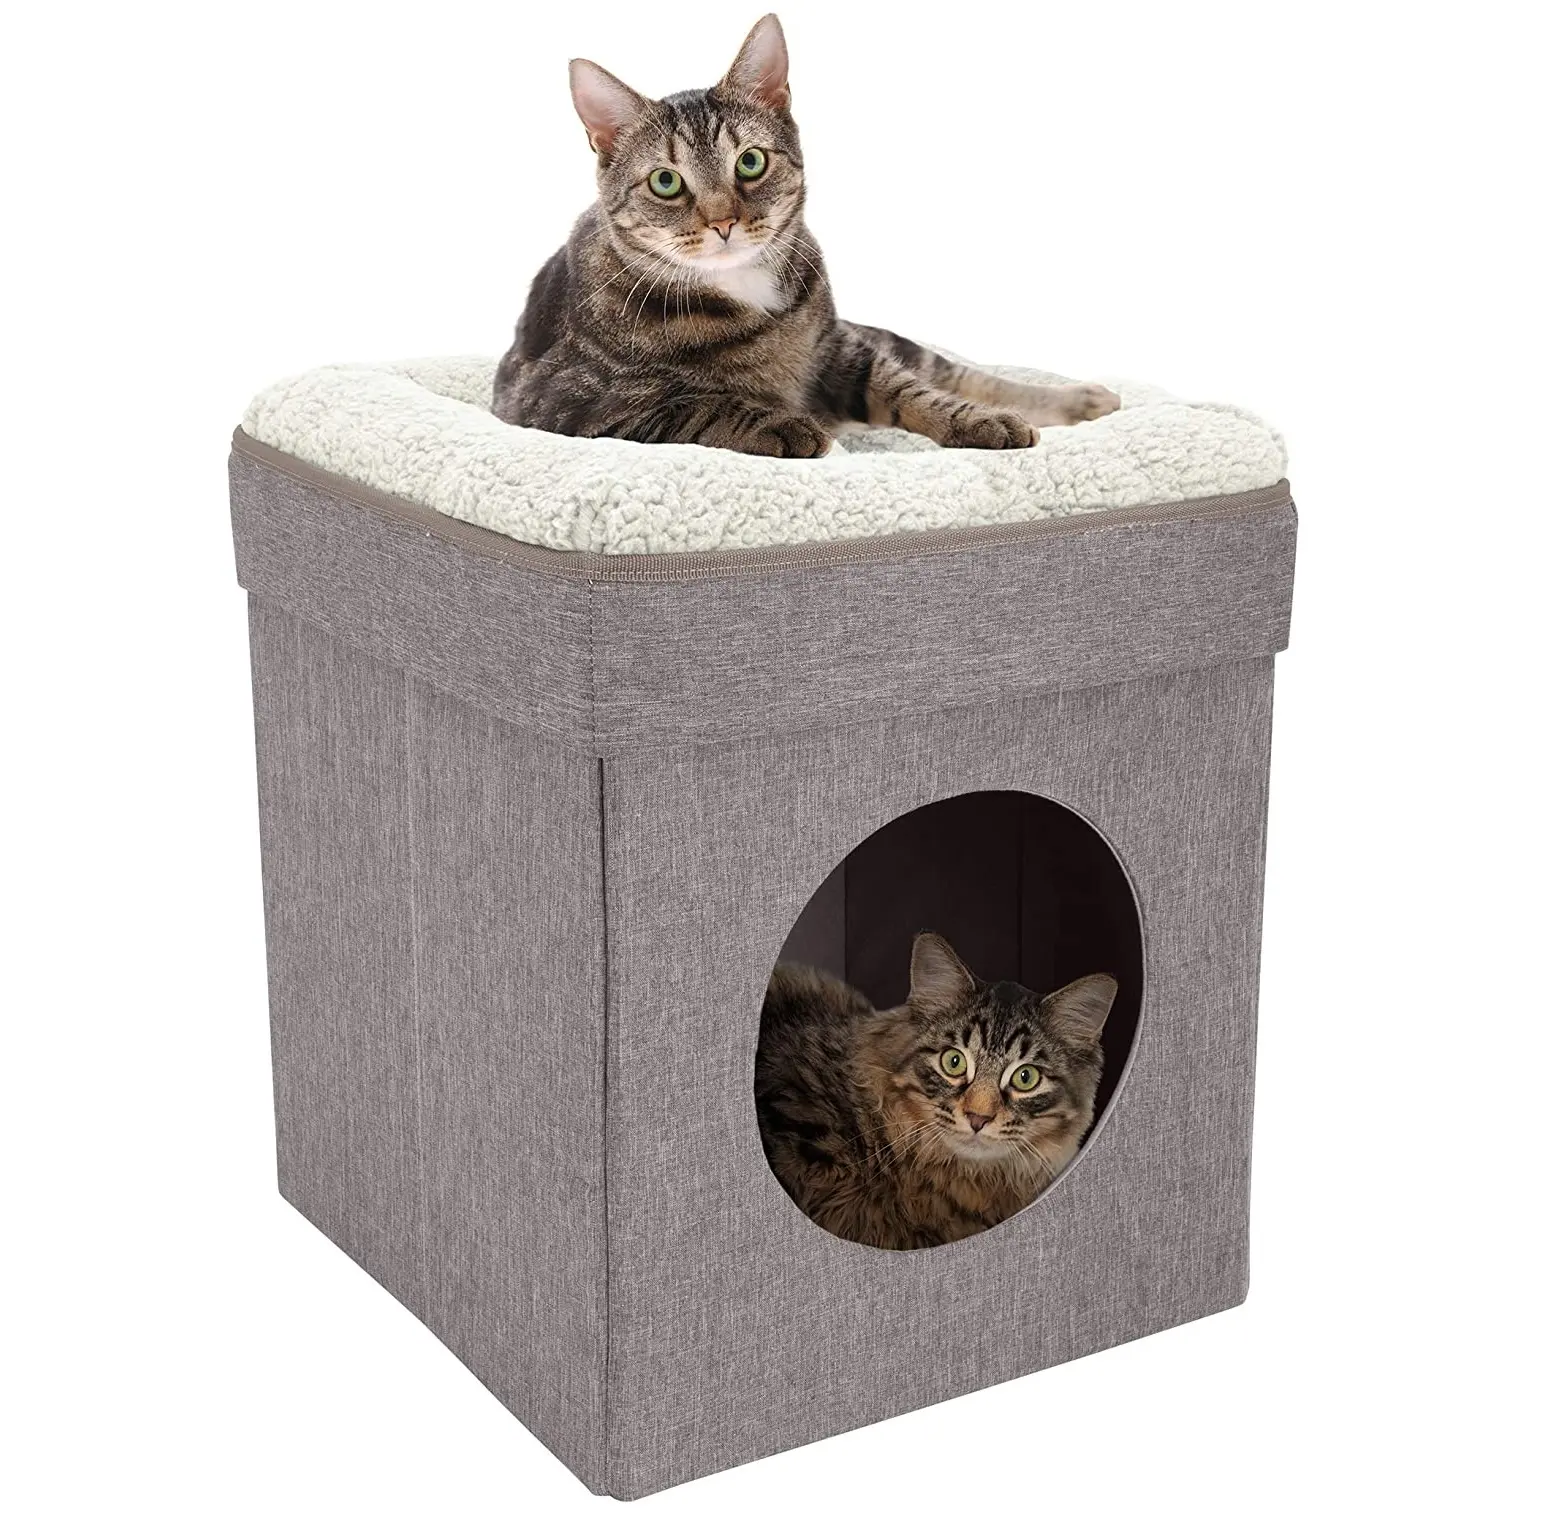 2 in 1 Small Dog Bed Cat Tent Hut Cave Beds Collapsible Cat House with Bed for indoor cats Casa para gatos con cama